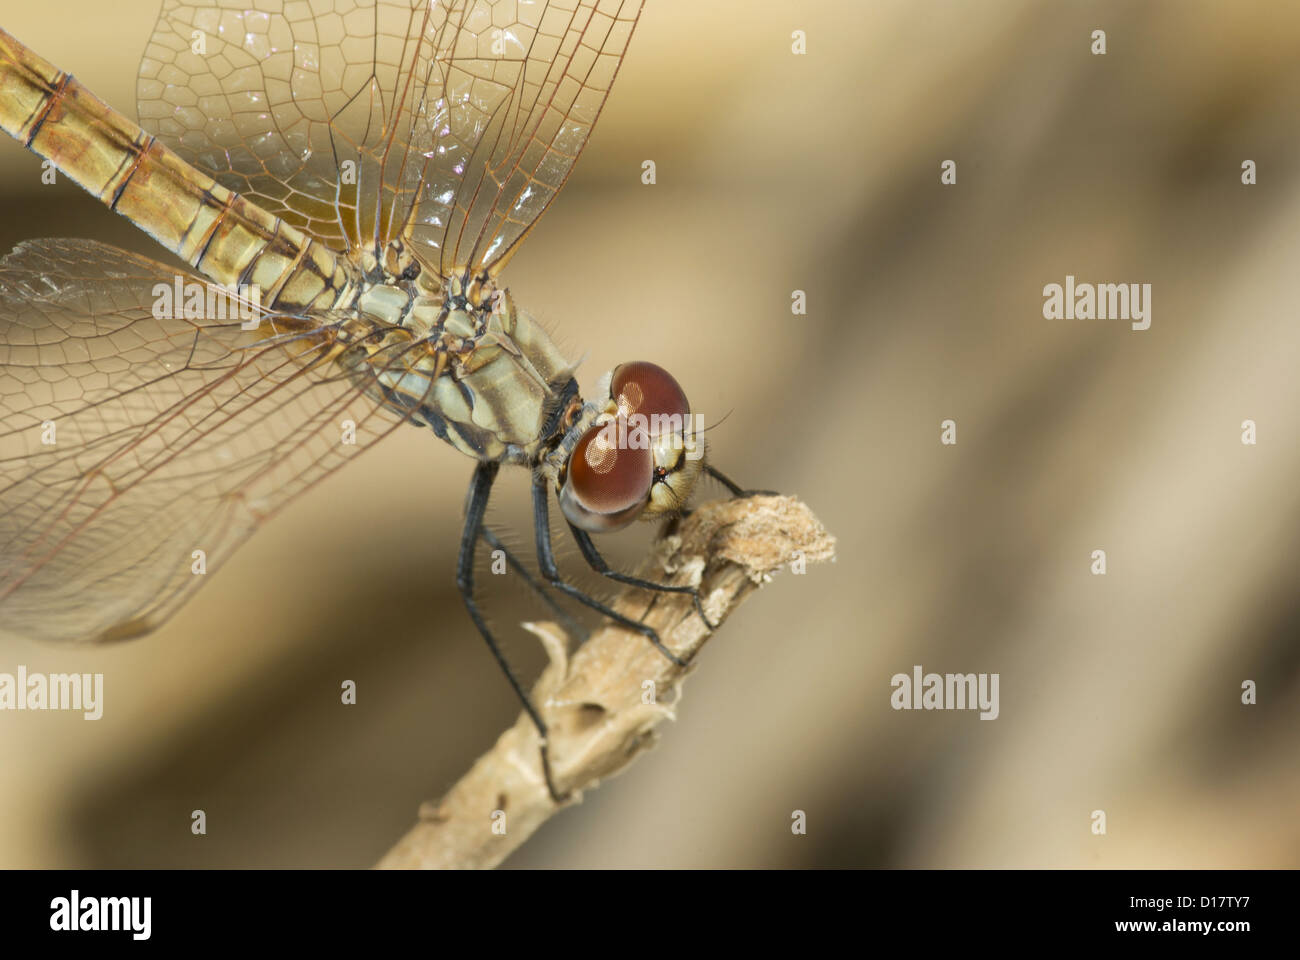 Dragonfly, perched on a branch. Stock Photo